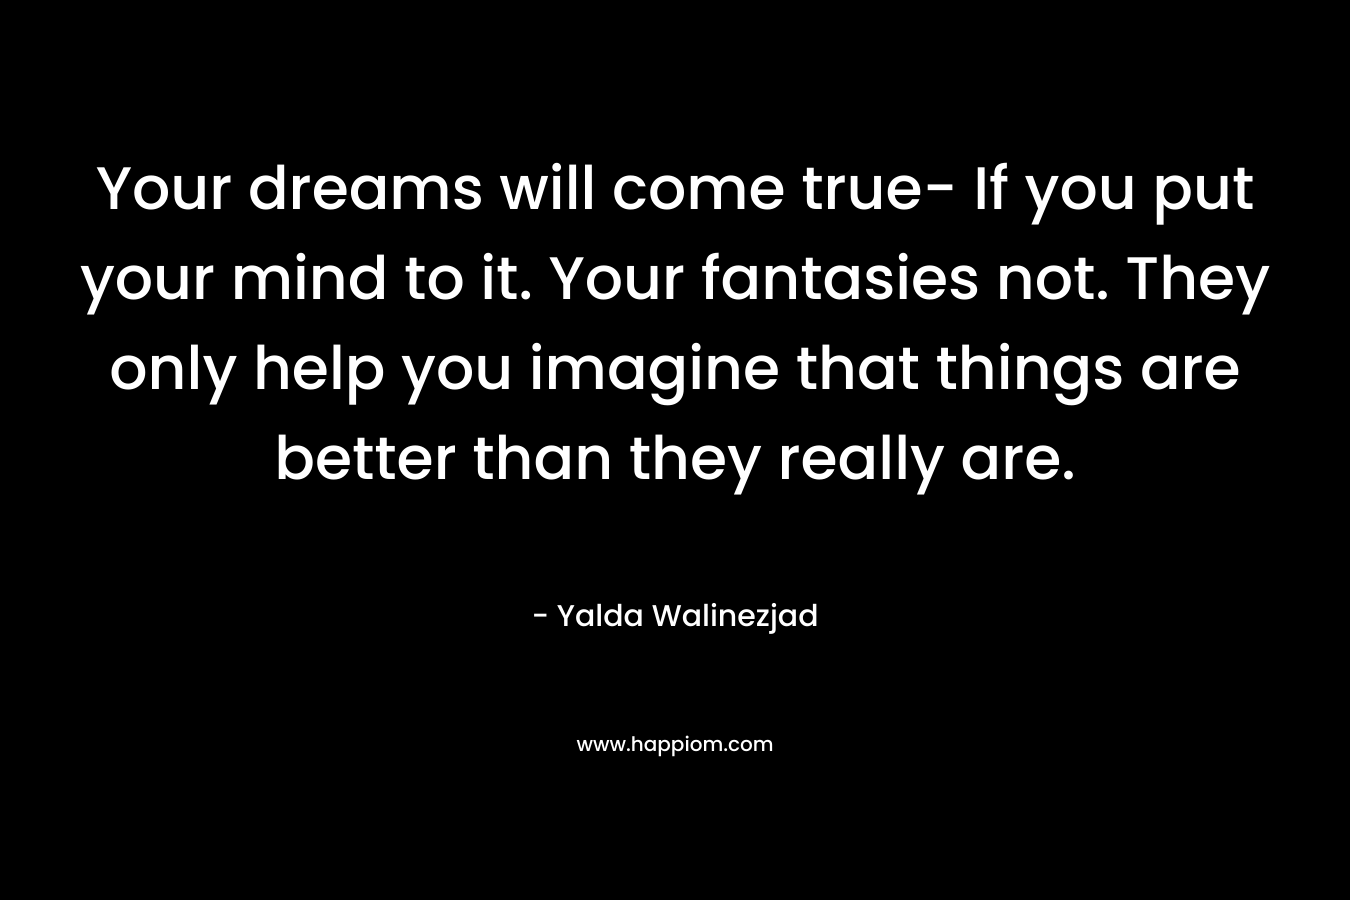 Your dreams will come true- If you put your mind to it. Your fantasies not. They only help you imagine that things are better than they really are.